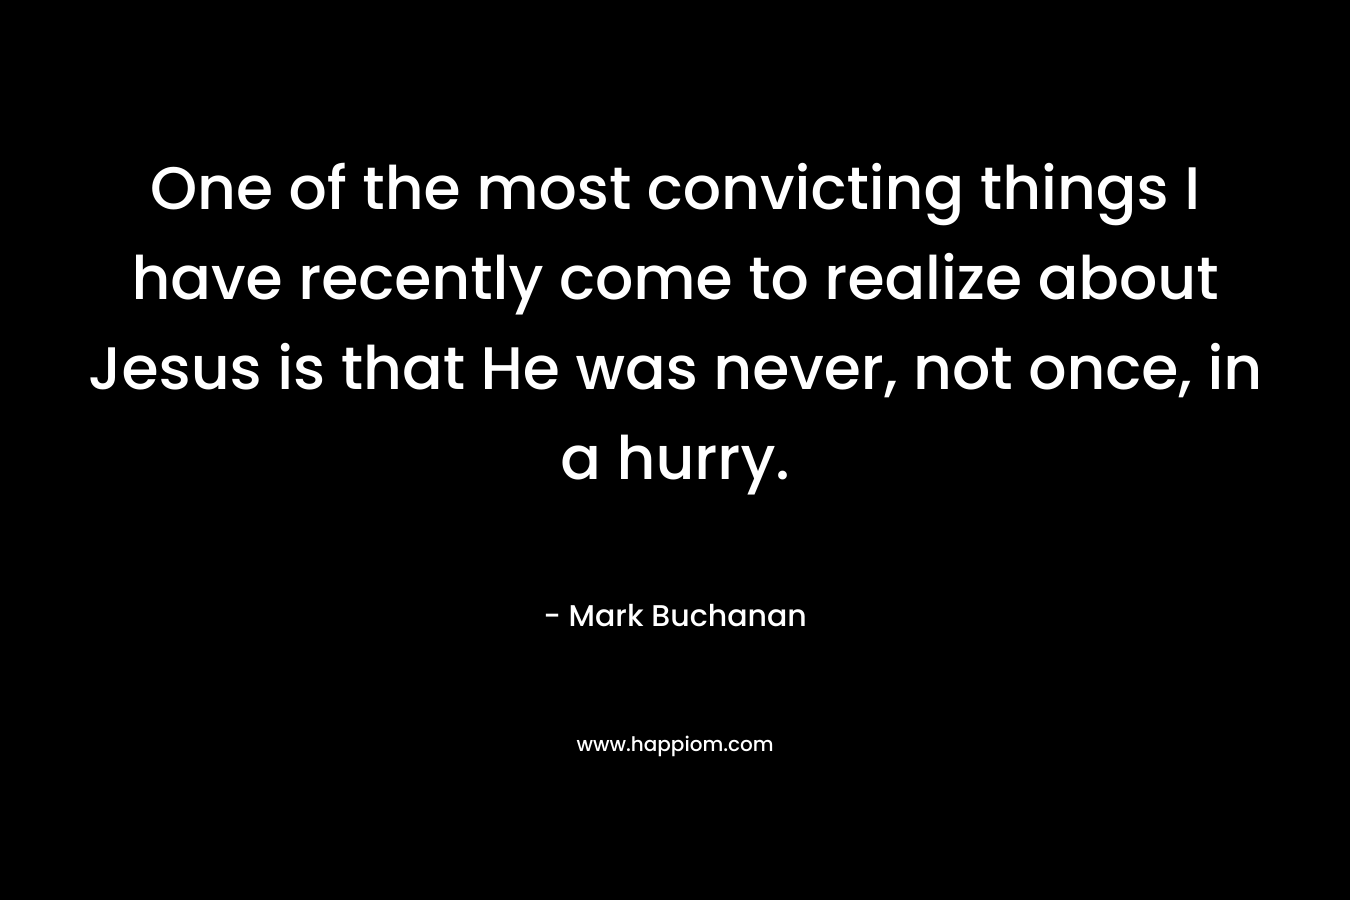 One of the most convicting things I have recently come to realize about Jesus is that He was never, not once, in a hurry. – Mark Buchanan